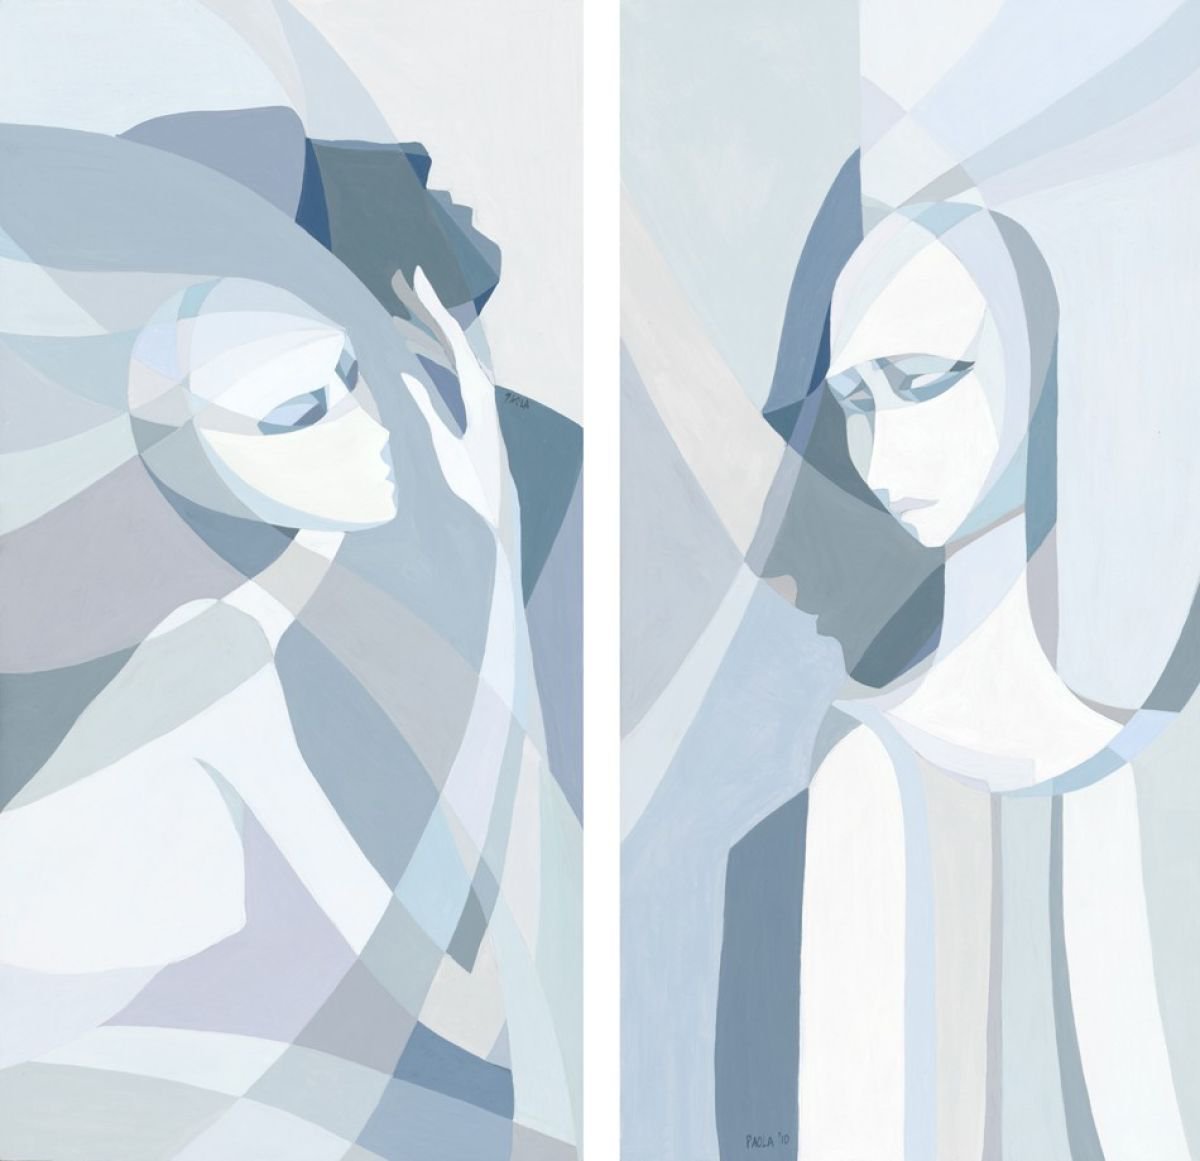 Echoes of Romance, diptych by Paola Minekov